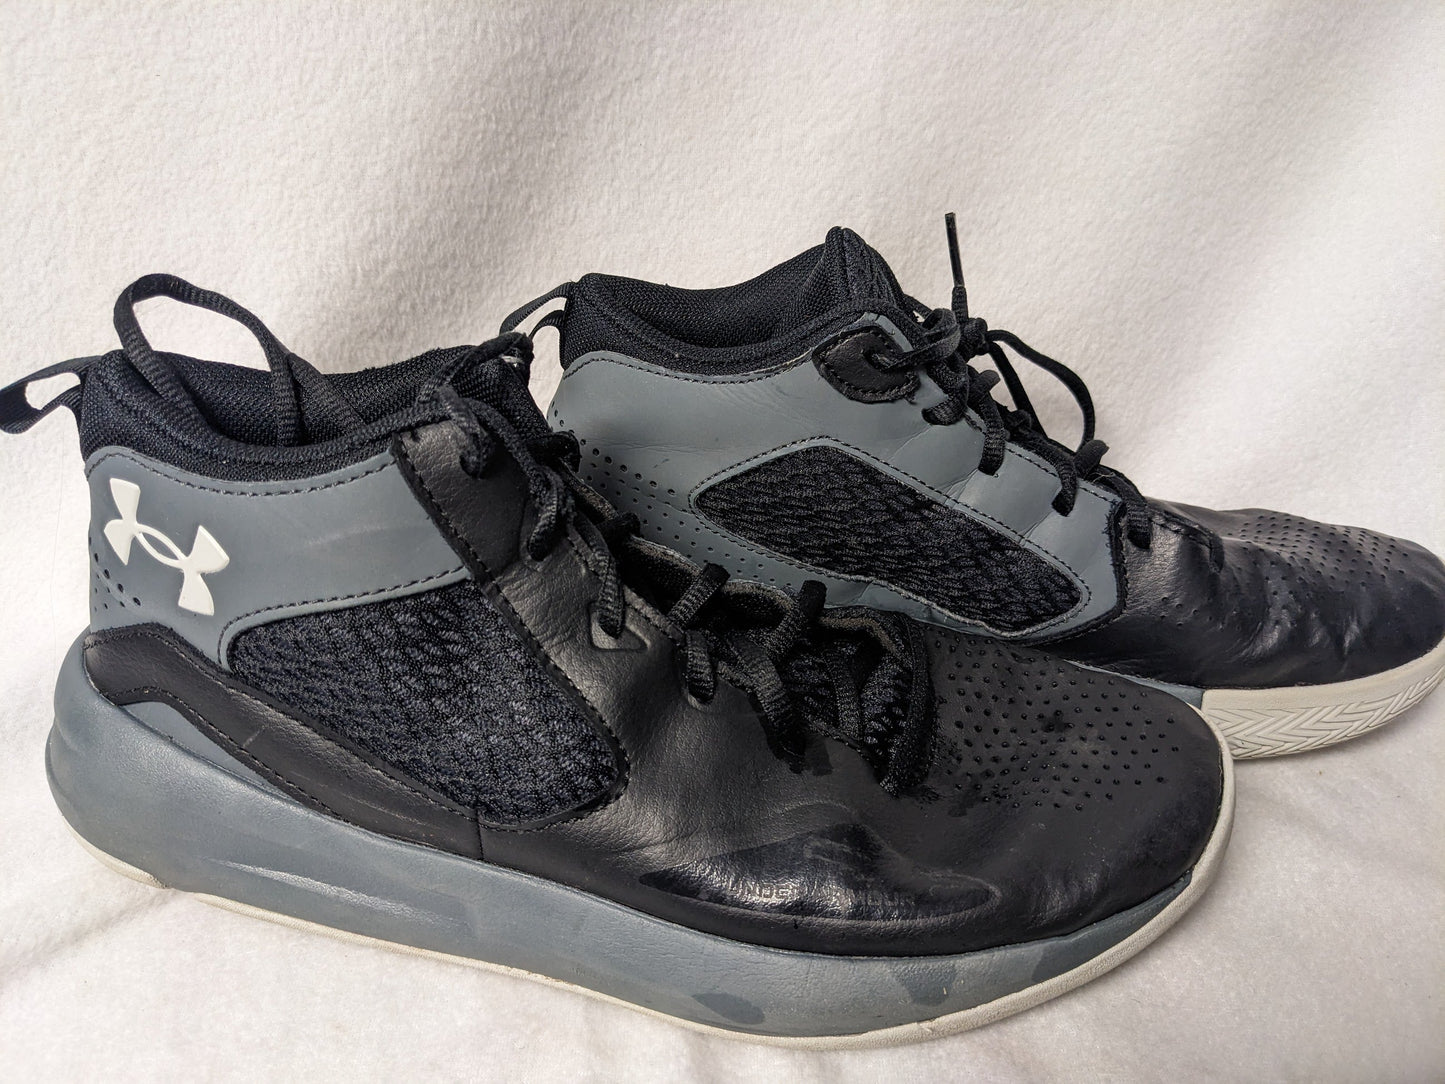 Under Armour Athletic Shoes Size 10 Color Black Condition Used